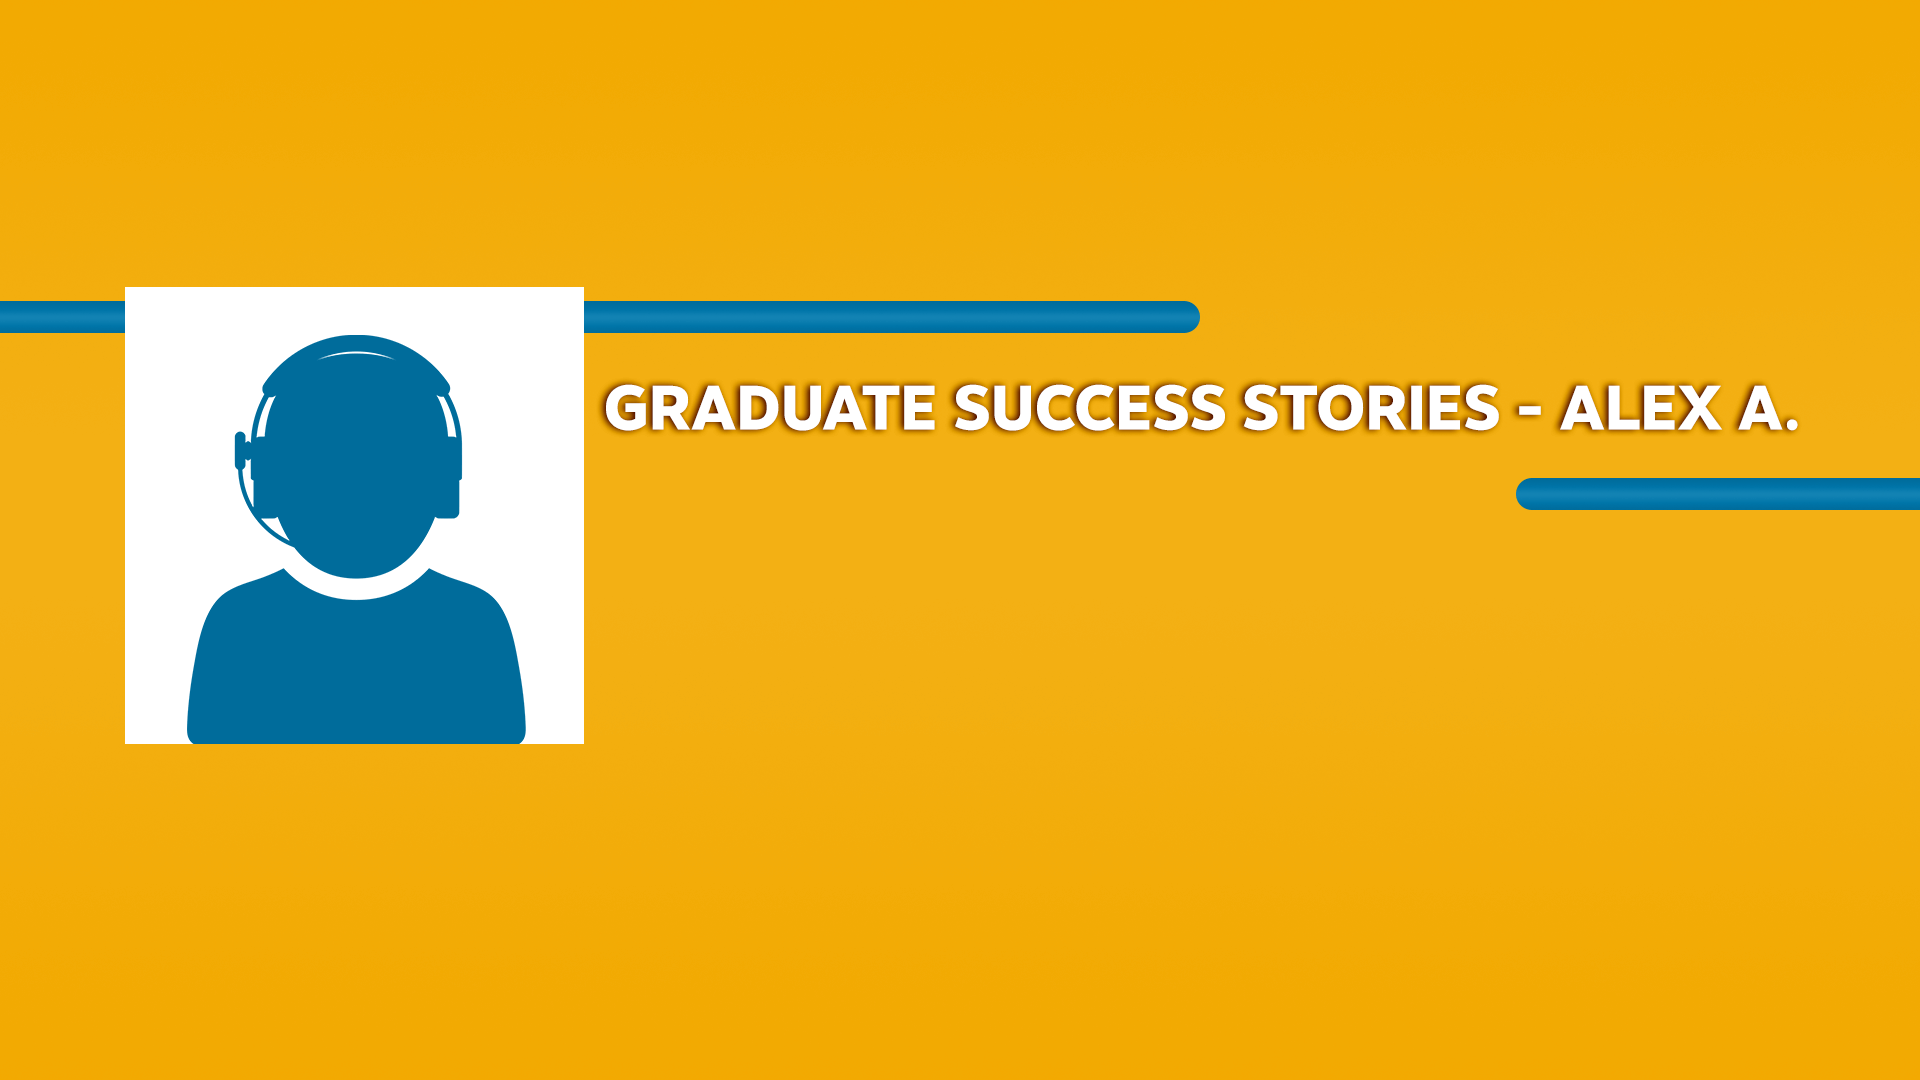 Orange rectangle with a blue icon of a person wearing a headset and Graduate Success Stories - Alex A. text in white font